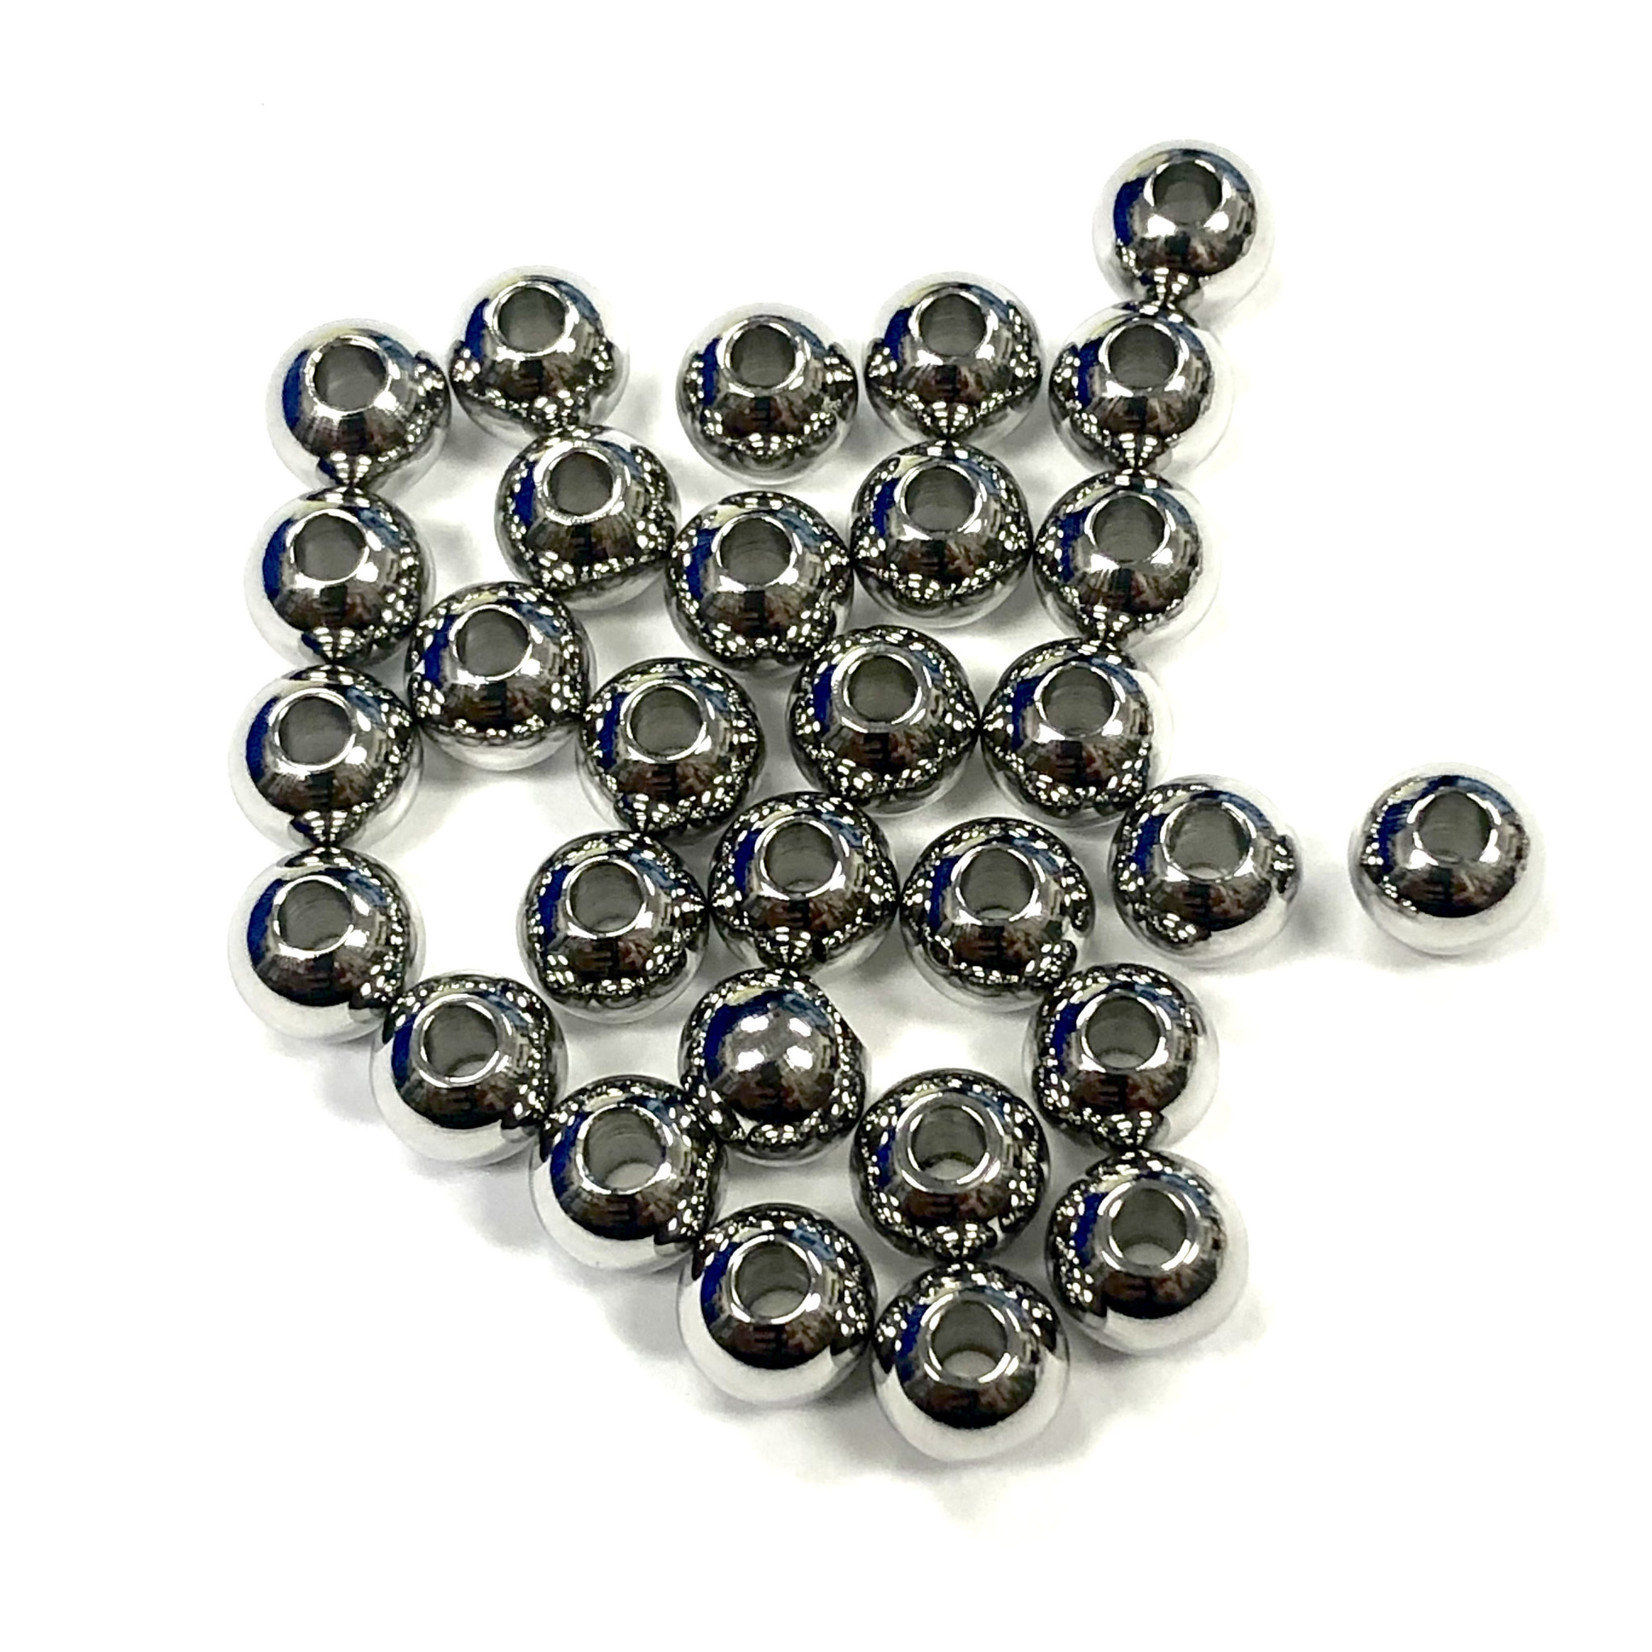 Stainless Steel Spacer Bead 6mm Round 24pcs